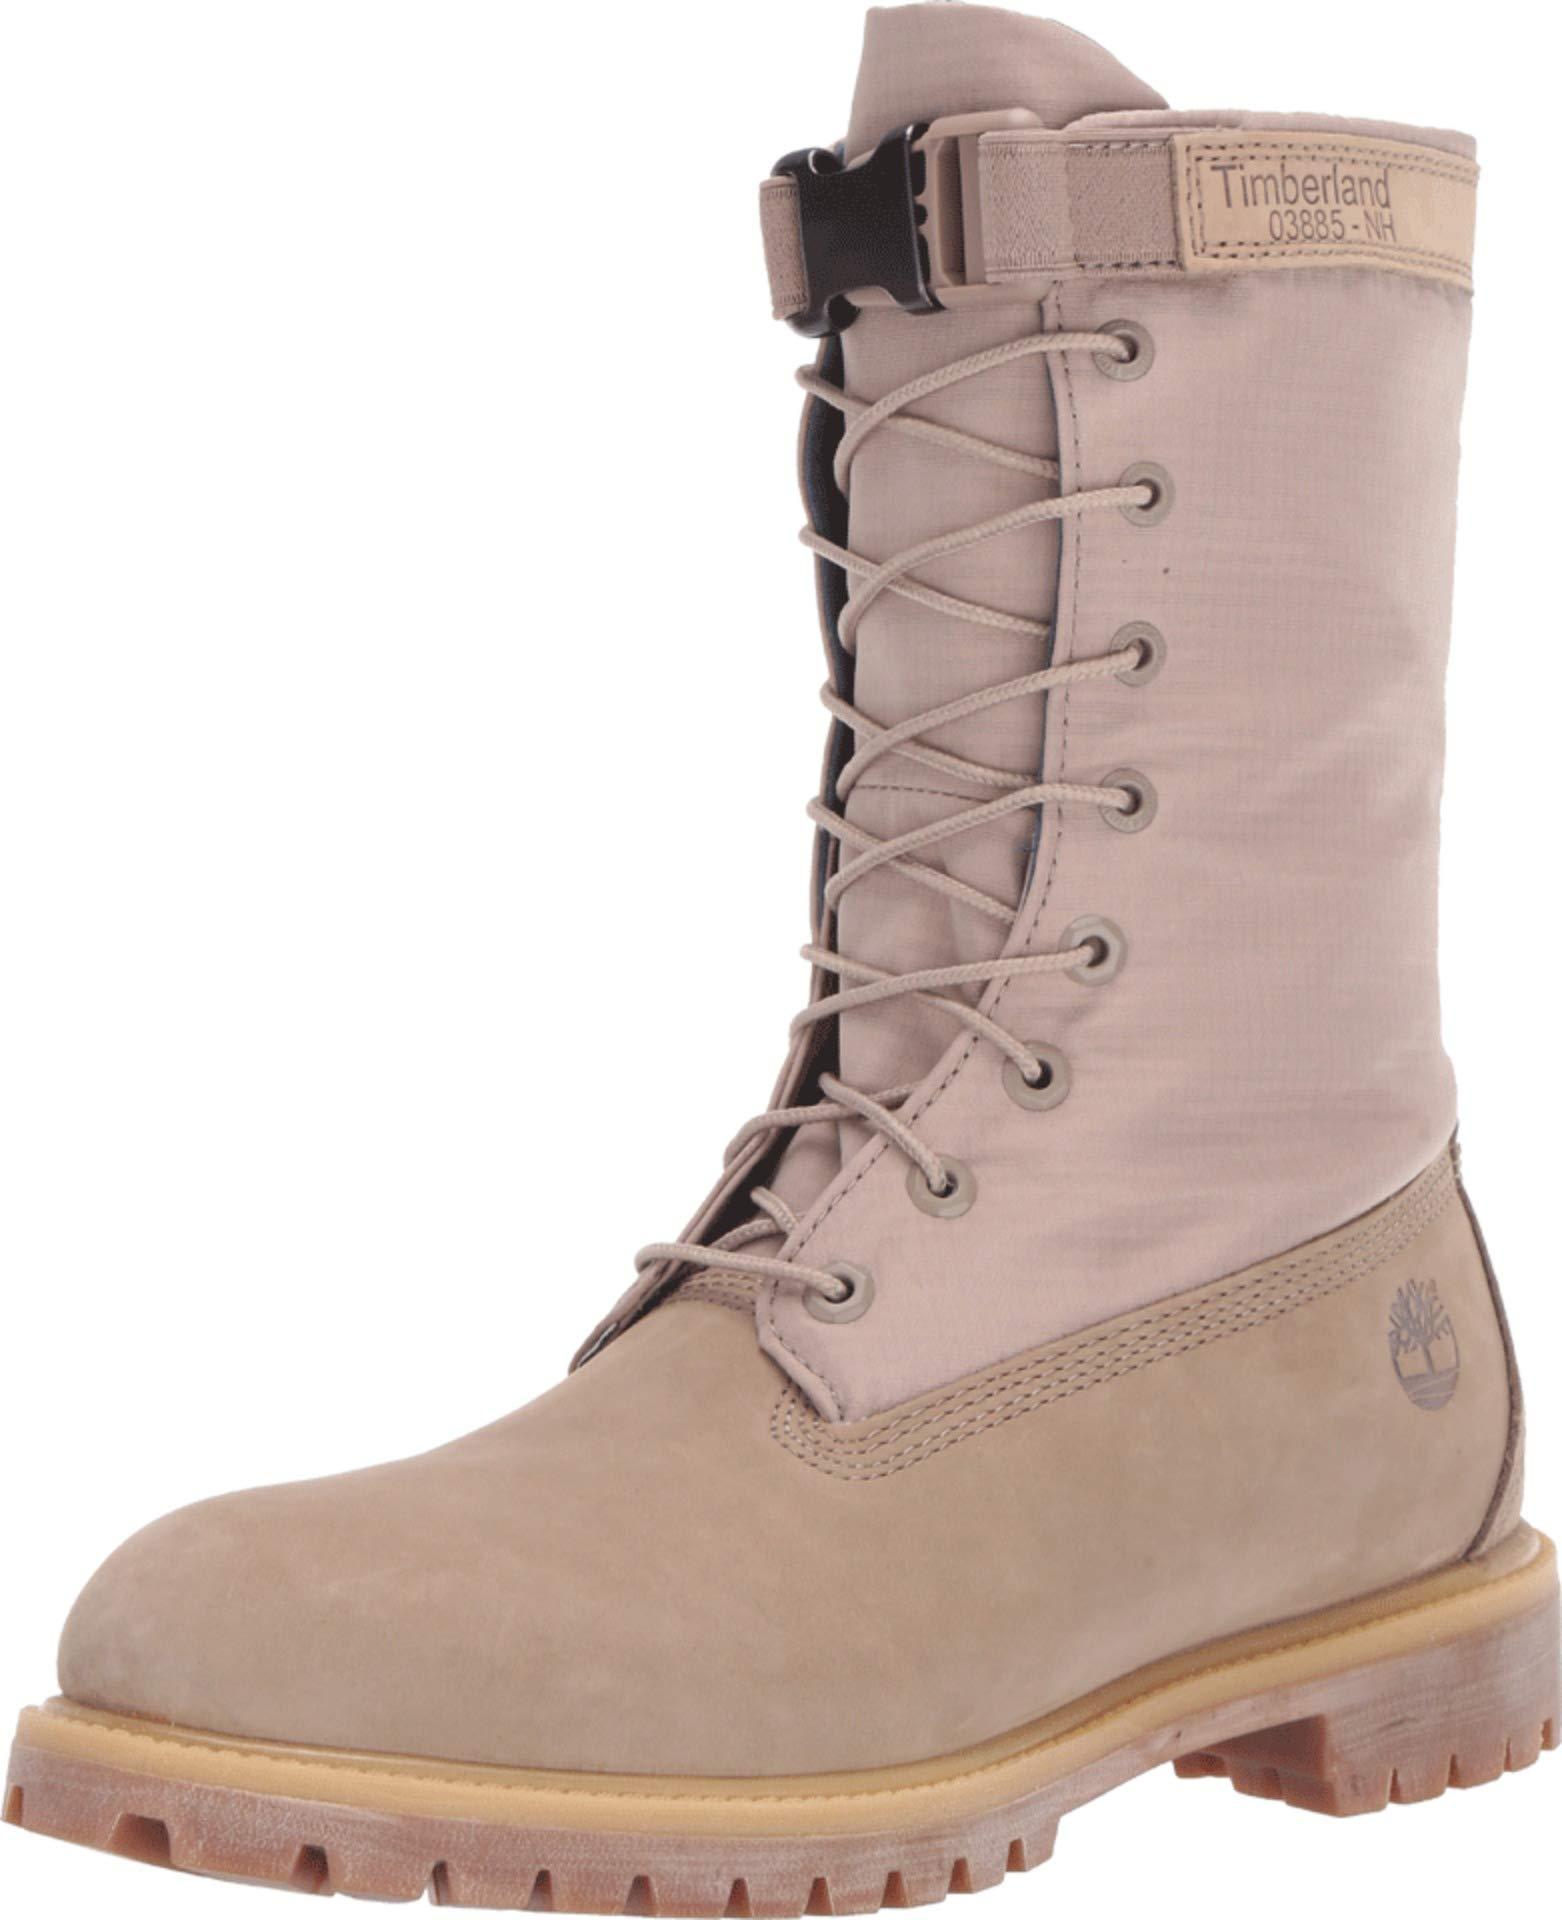 Timberland Synthetic 6 Premium Gaiter Boot in Beige (Natural) for Men | Lyst